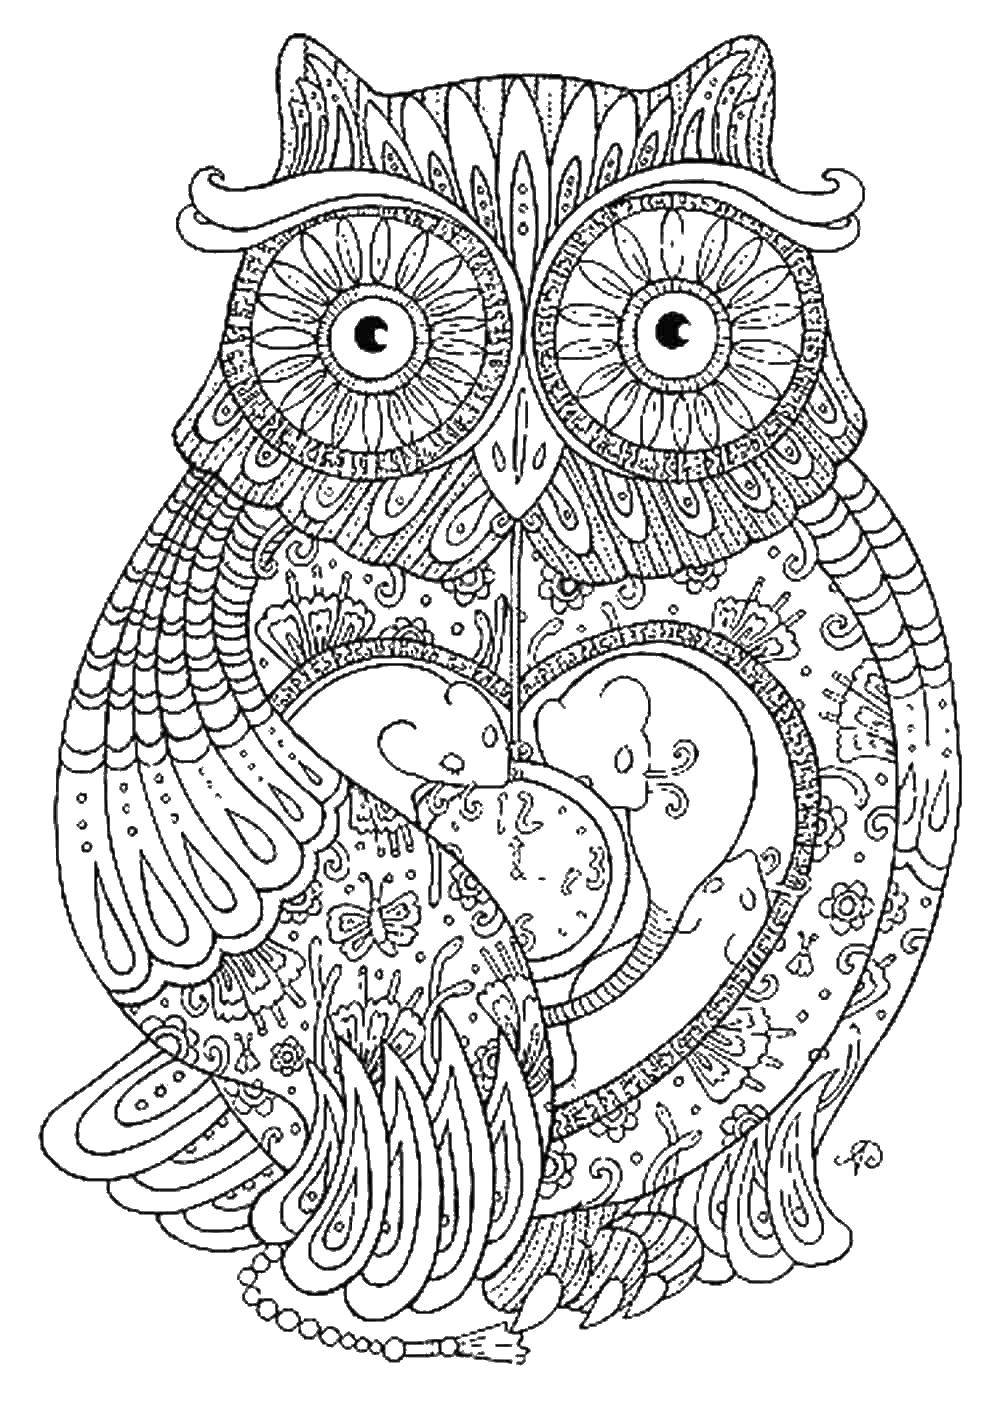 Coloring Ethnic owl. Category pattern . Tags:  Patterns, ethnic.